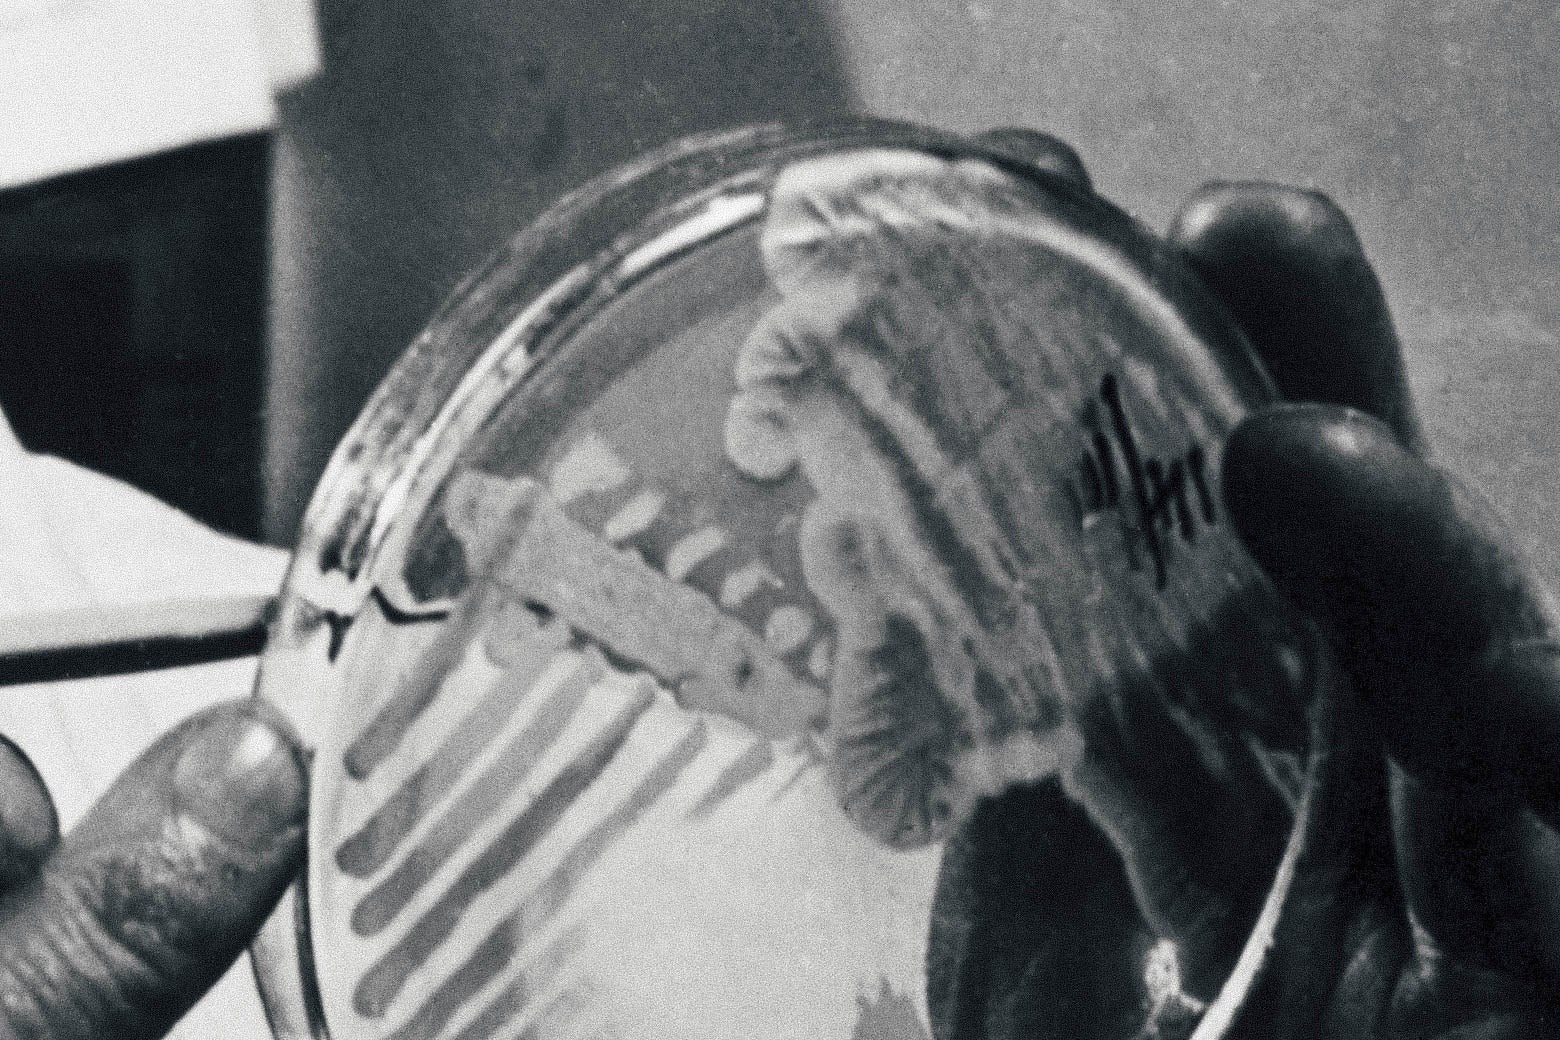 A black and white image of hands holding a Petri dish with  penicillin mold in it.